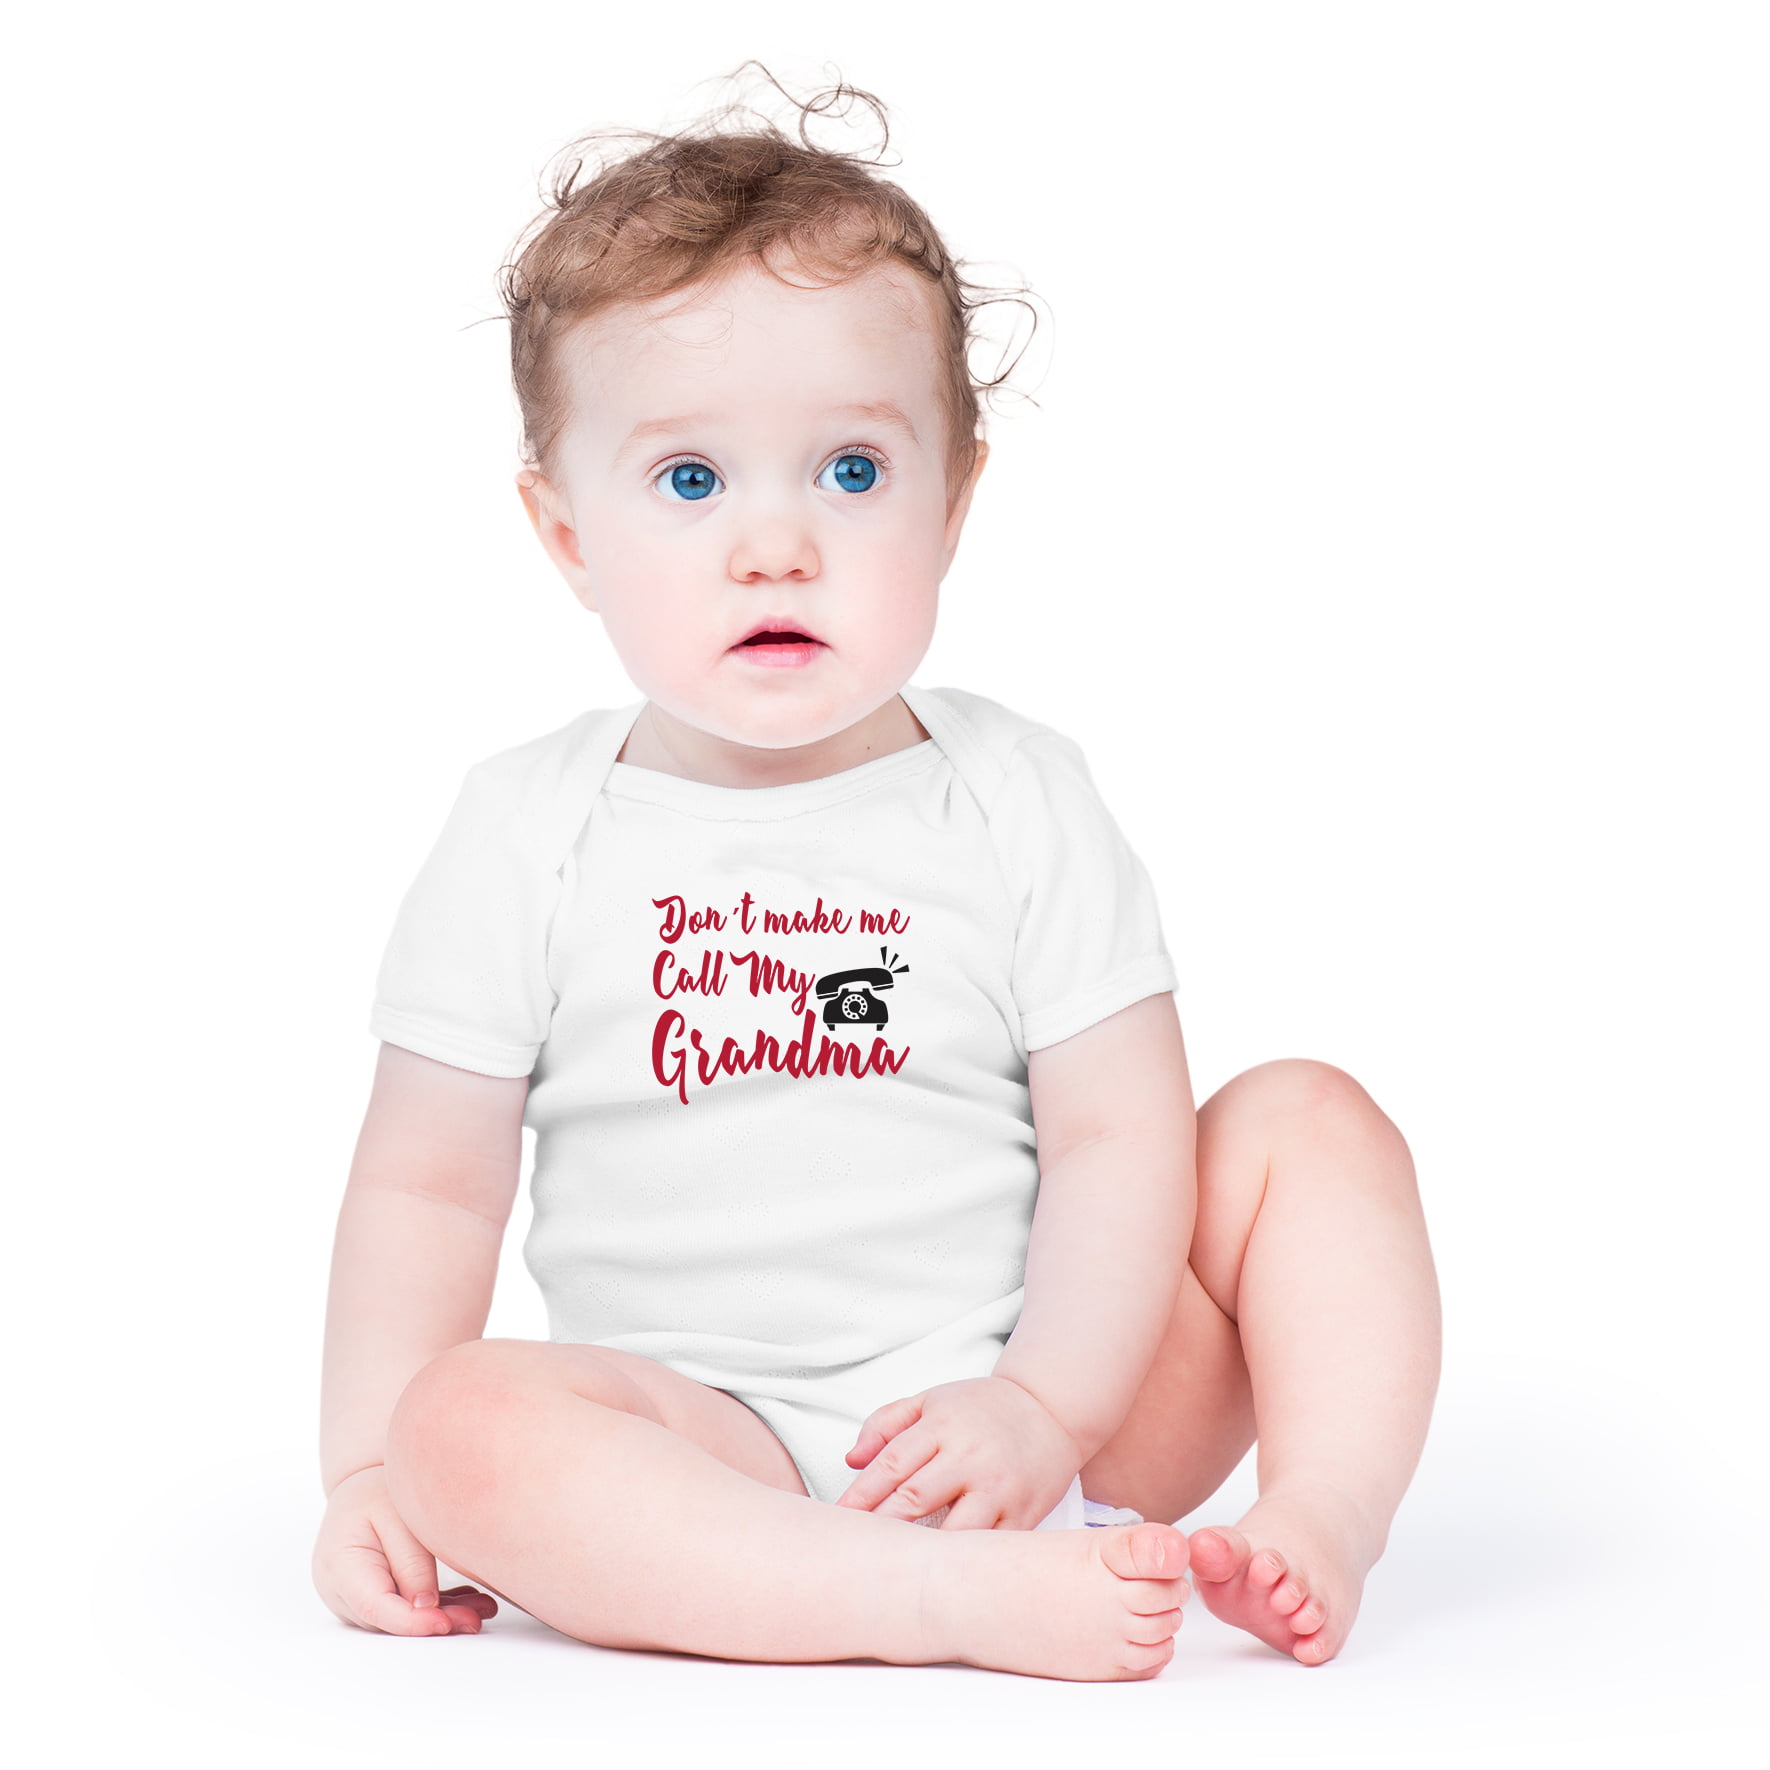 I Love My Grandmother Cute One-Piece Infant Baby Bodysuit Don't Make Me Call My Grandma 